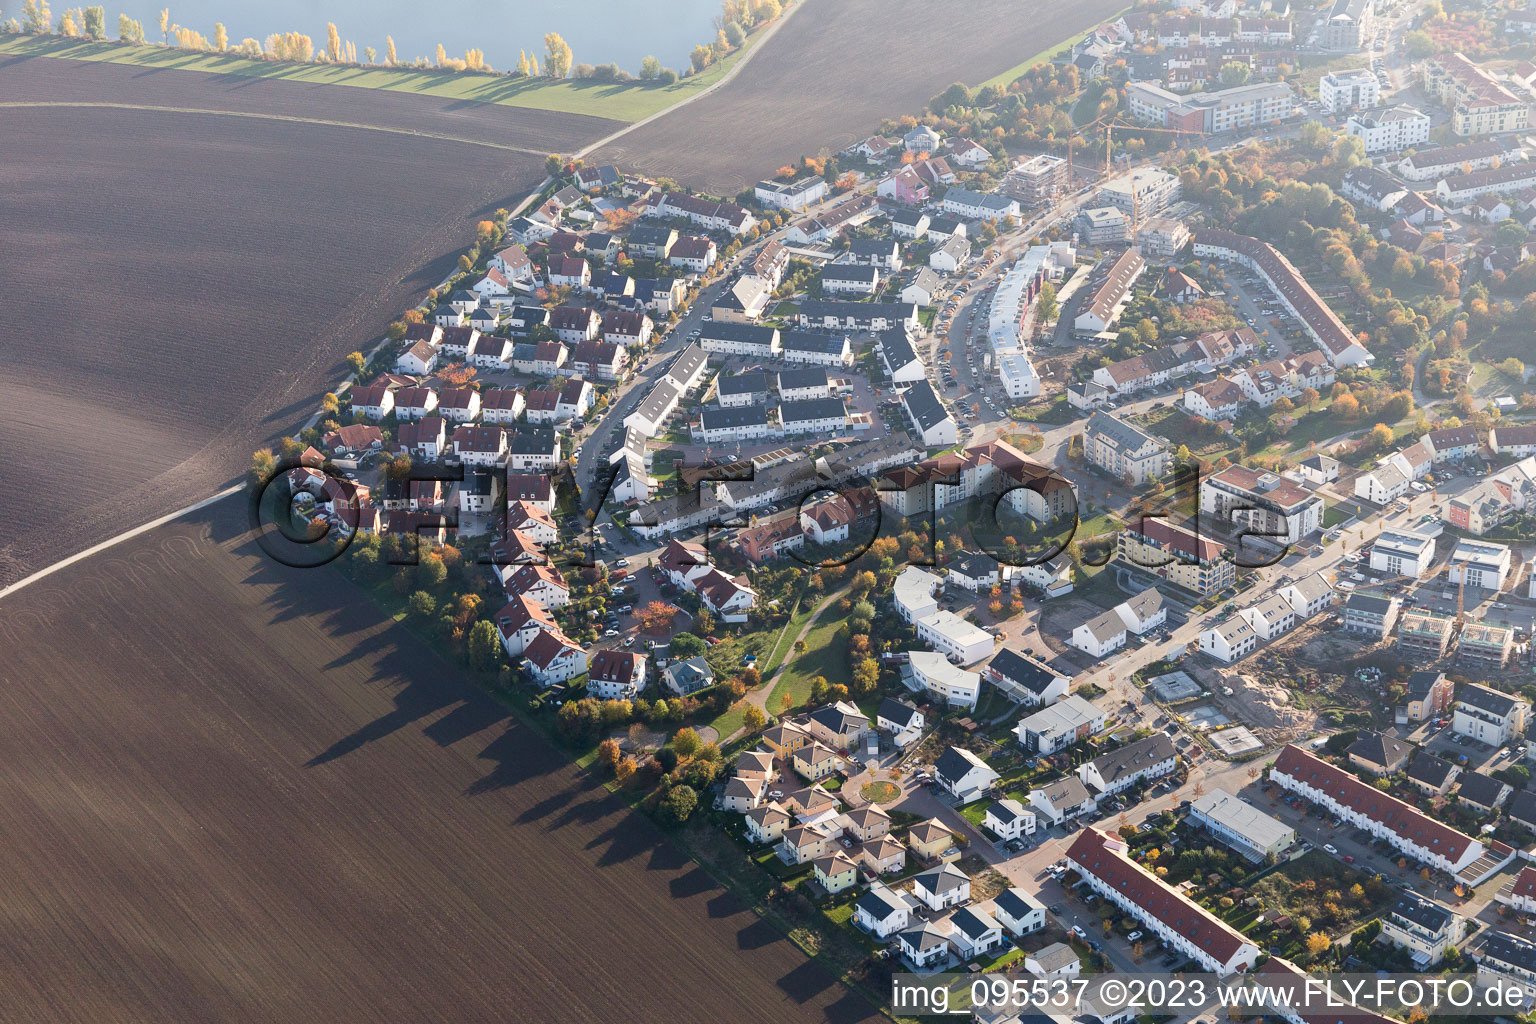 Drone image of District Oggersheim in Ludwigshafen am Rhein in the state Rhineland-Palatinate, Germany